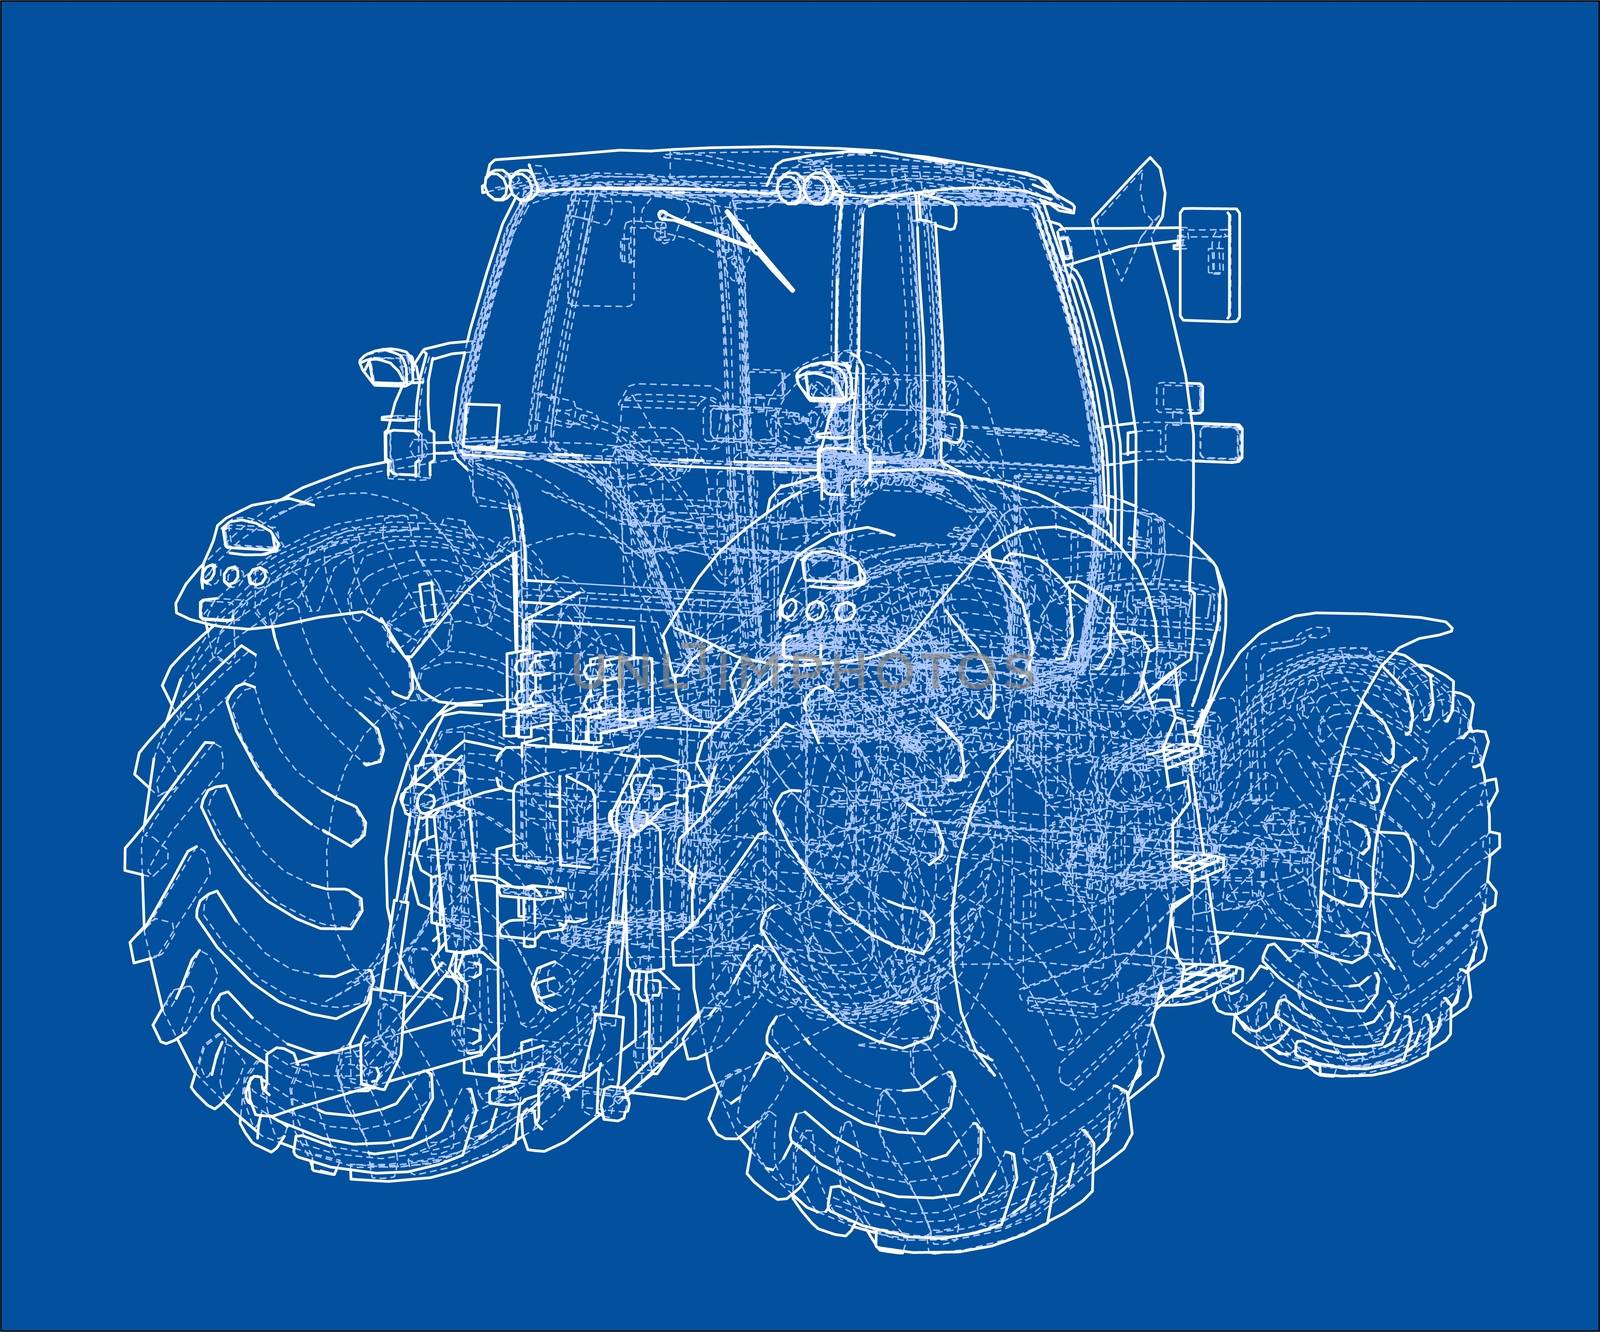 Farm Tractor Concept. 3d illustration. Wire-frame style